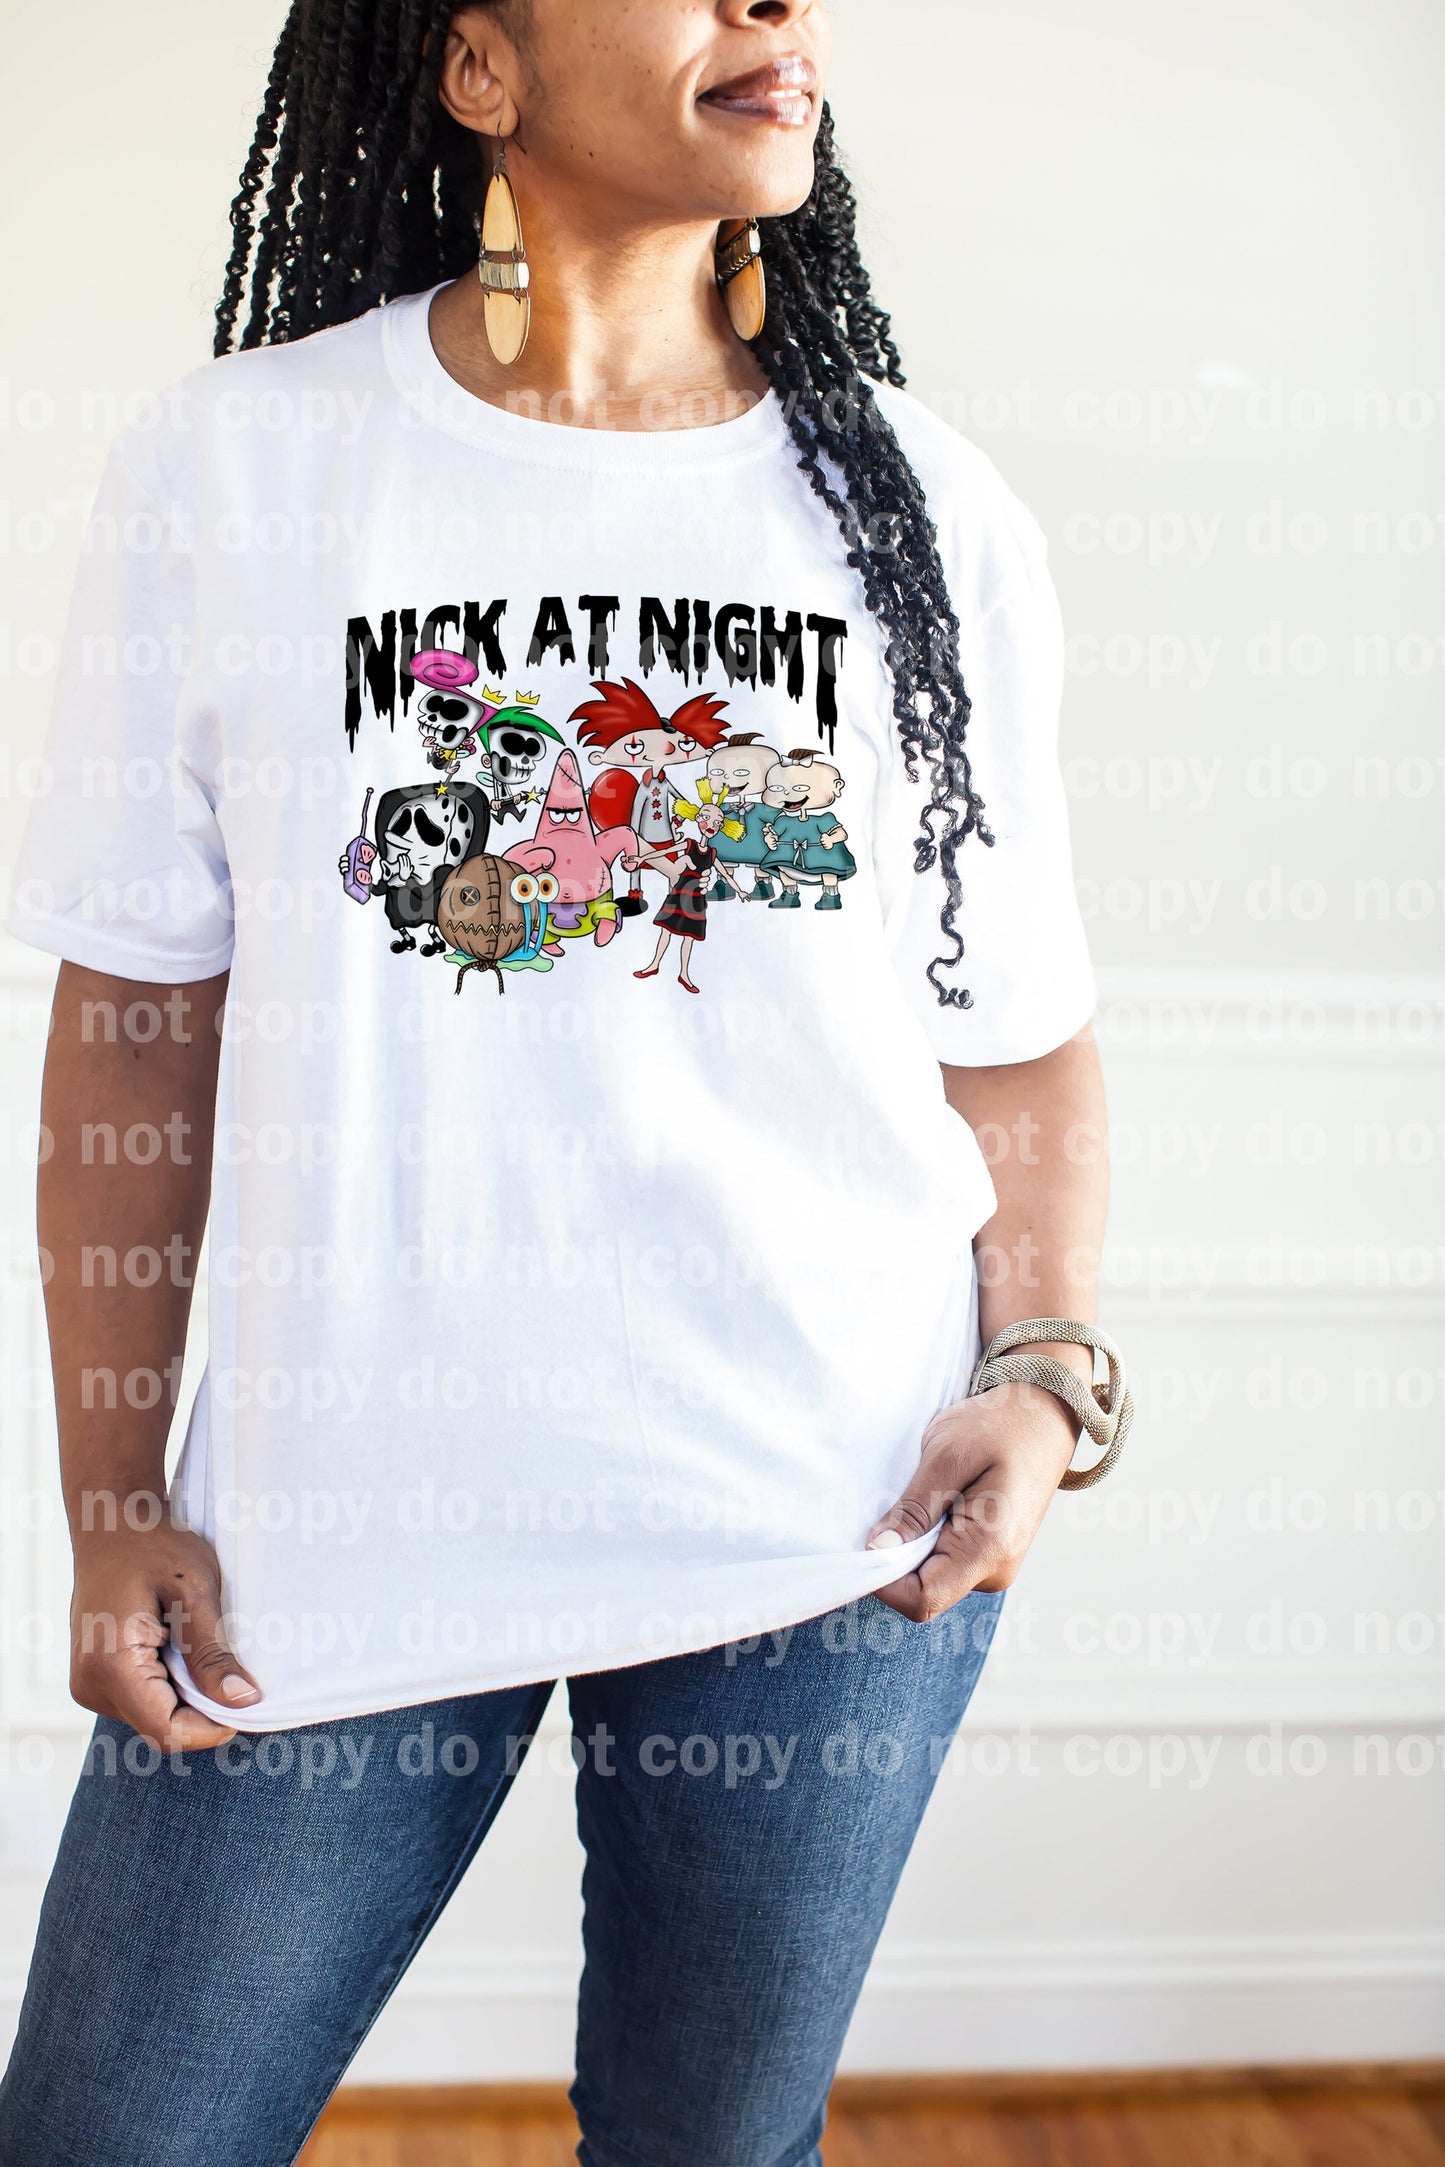 Nick At Night Dream Print or Sublimation Print